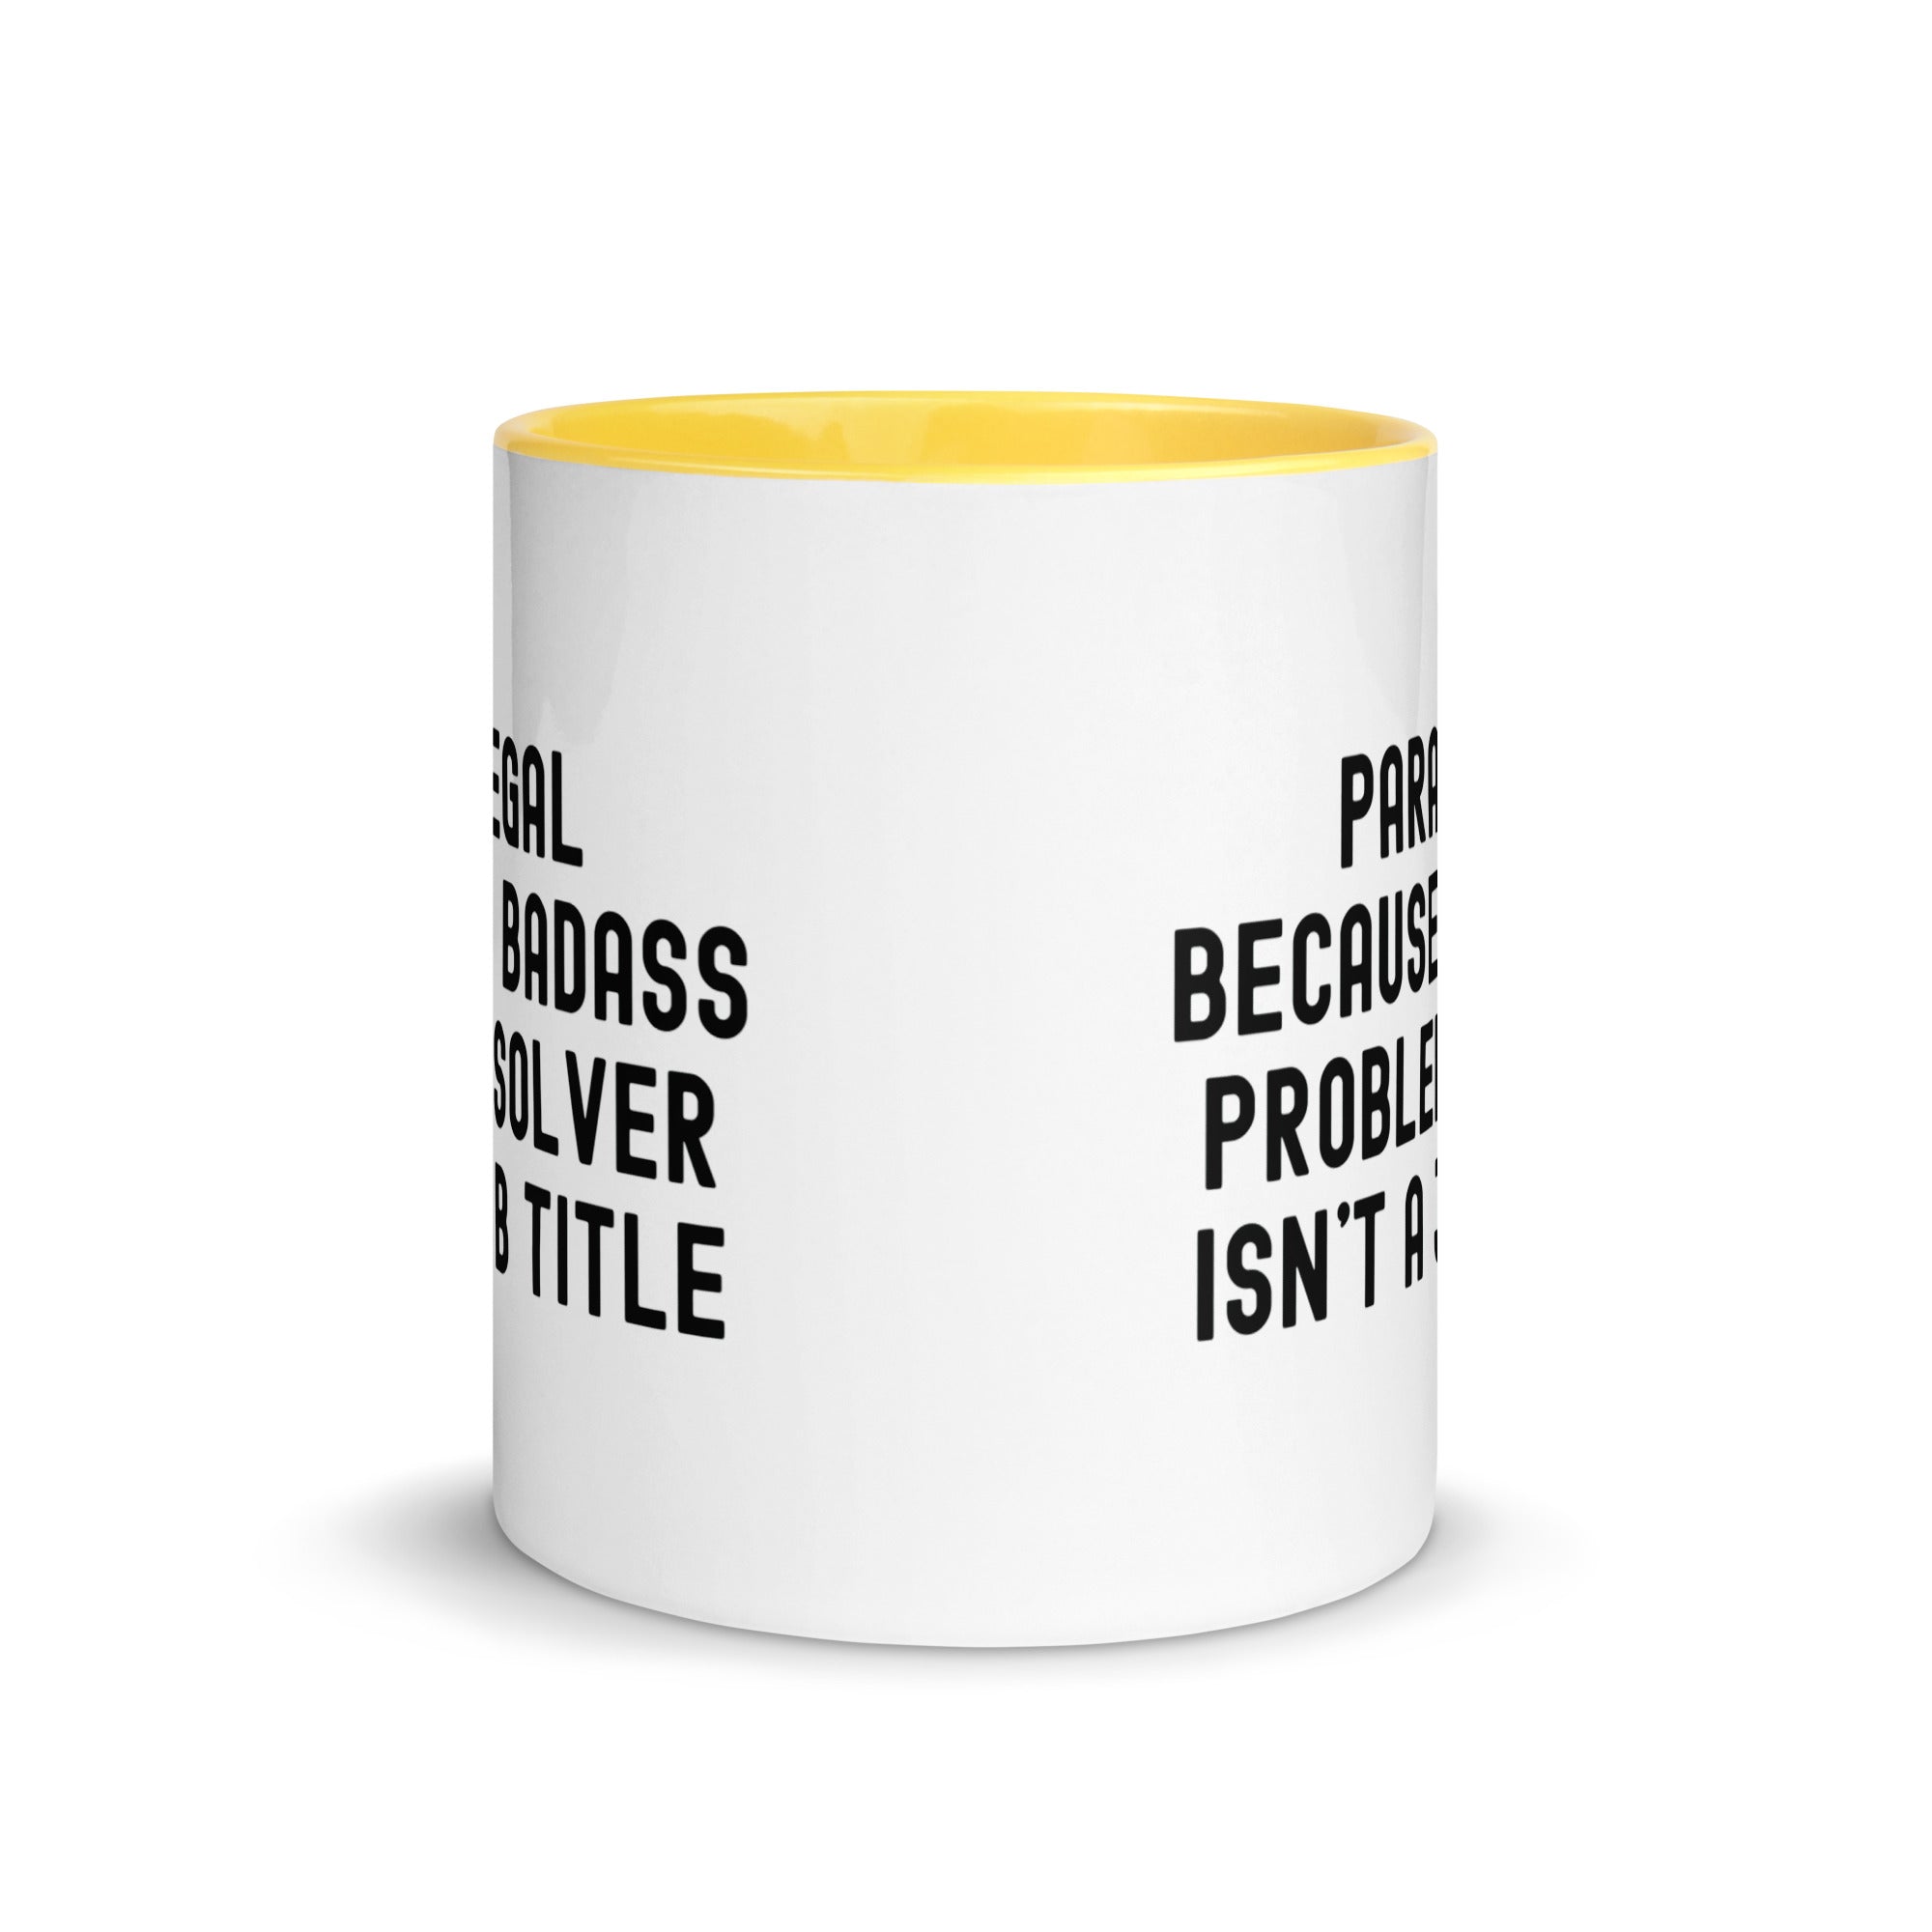 Mug with Color Inside | Paralegal because a badass problem solver isn’t a job title